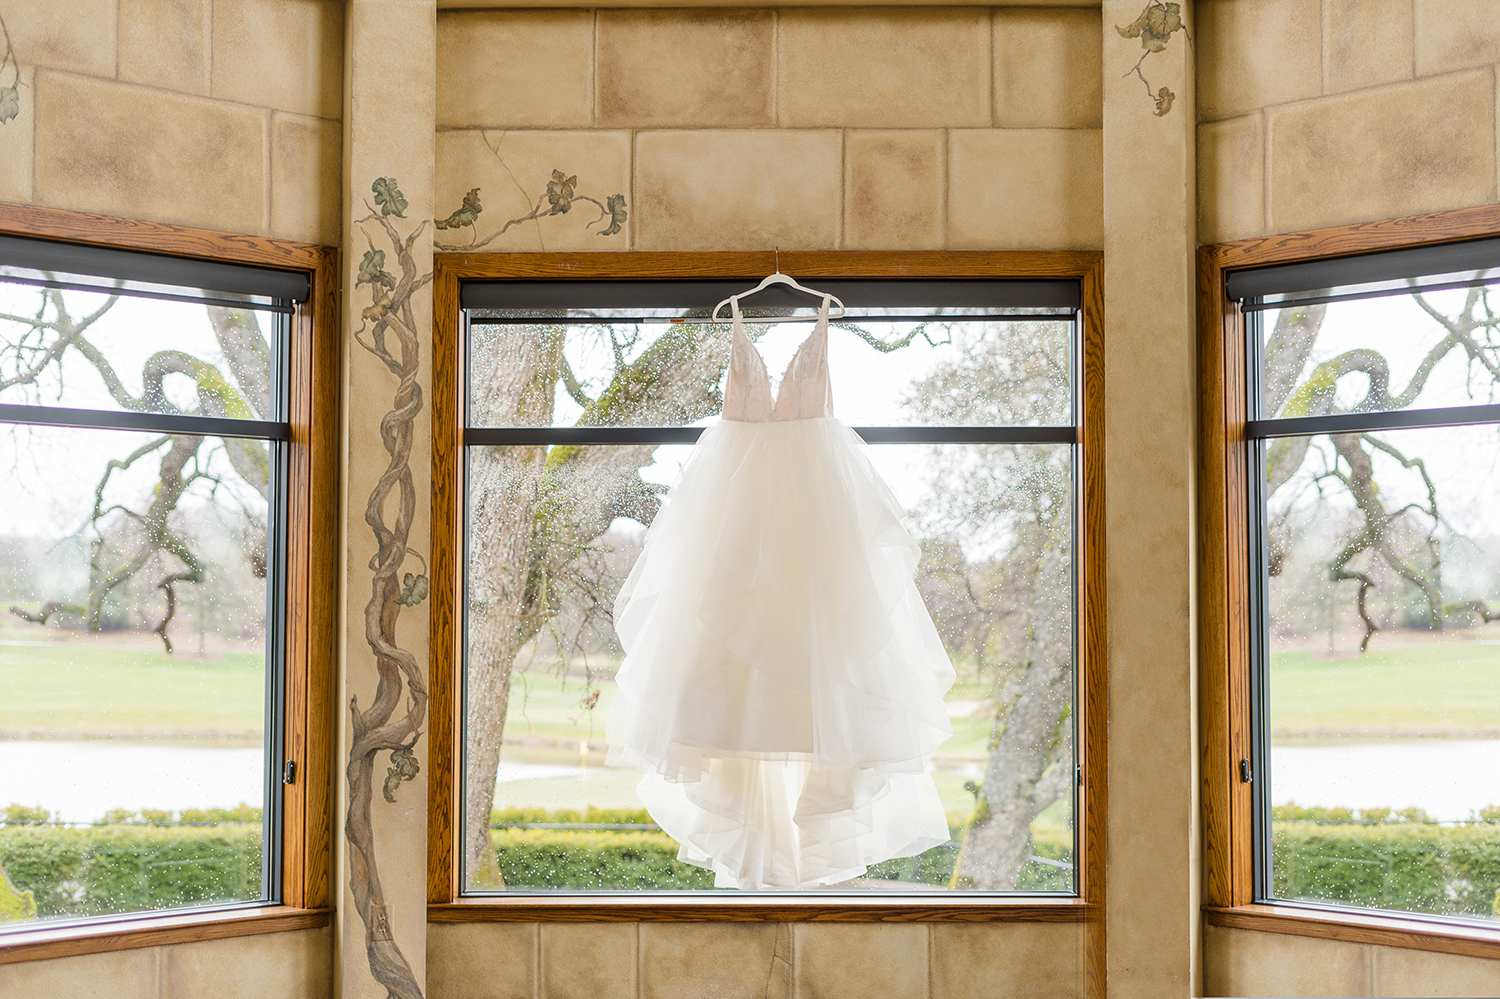 Bridal Details for a wedding at the Ridge Event Center by Adrienne and Dani Photography